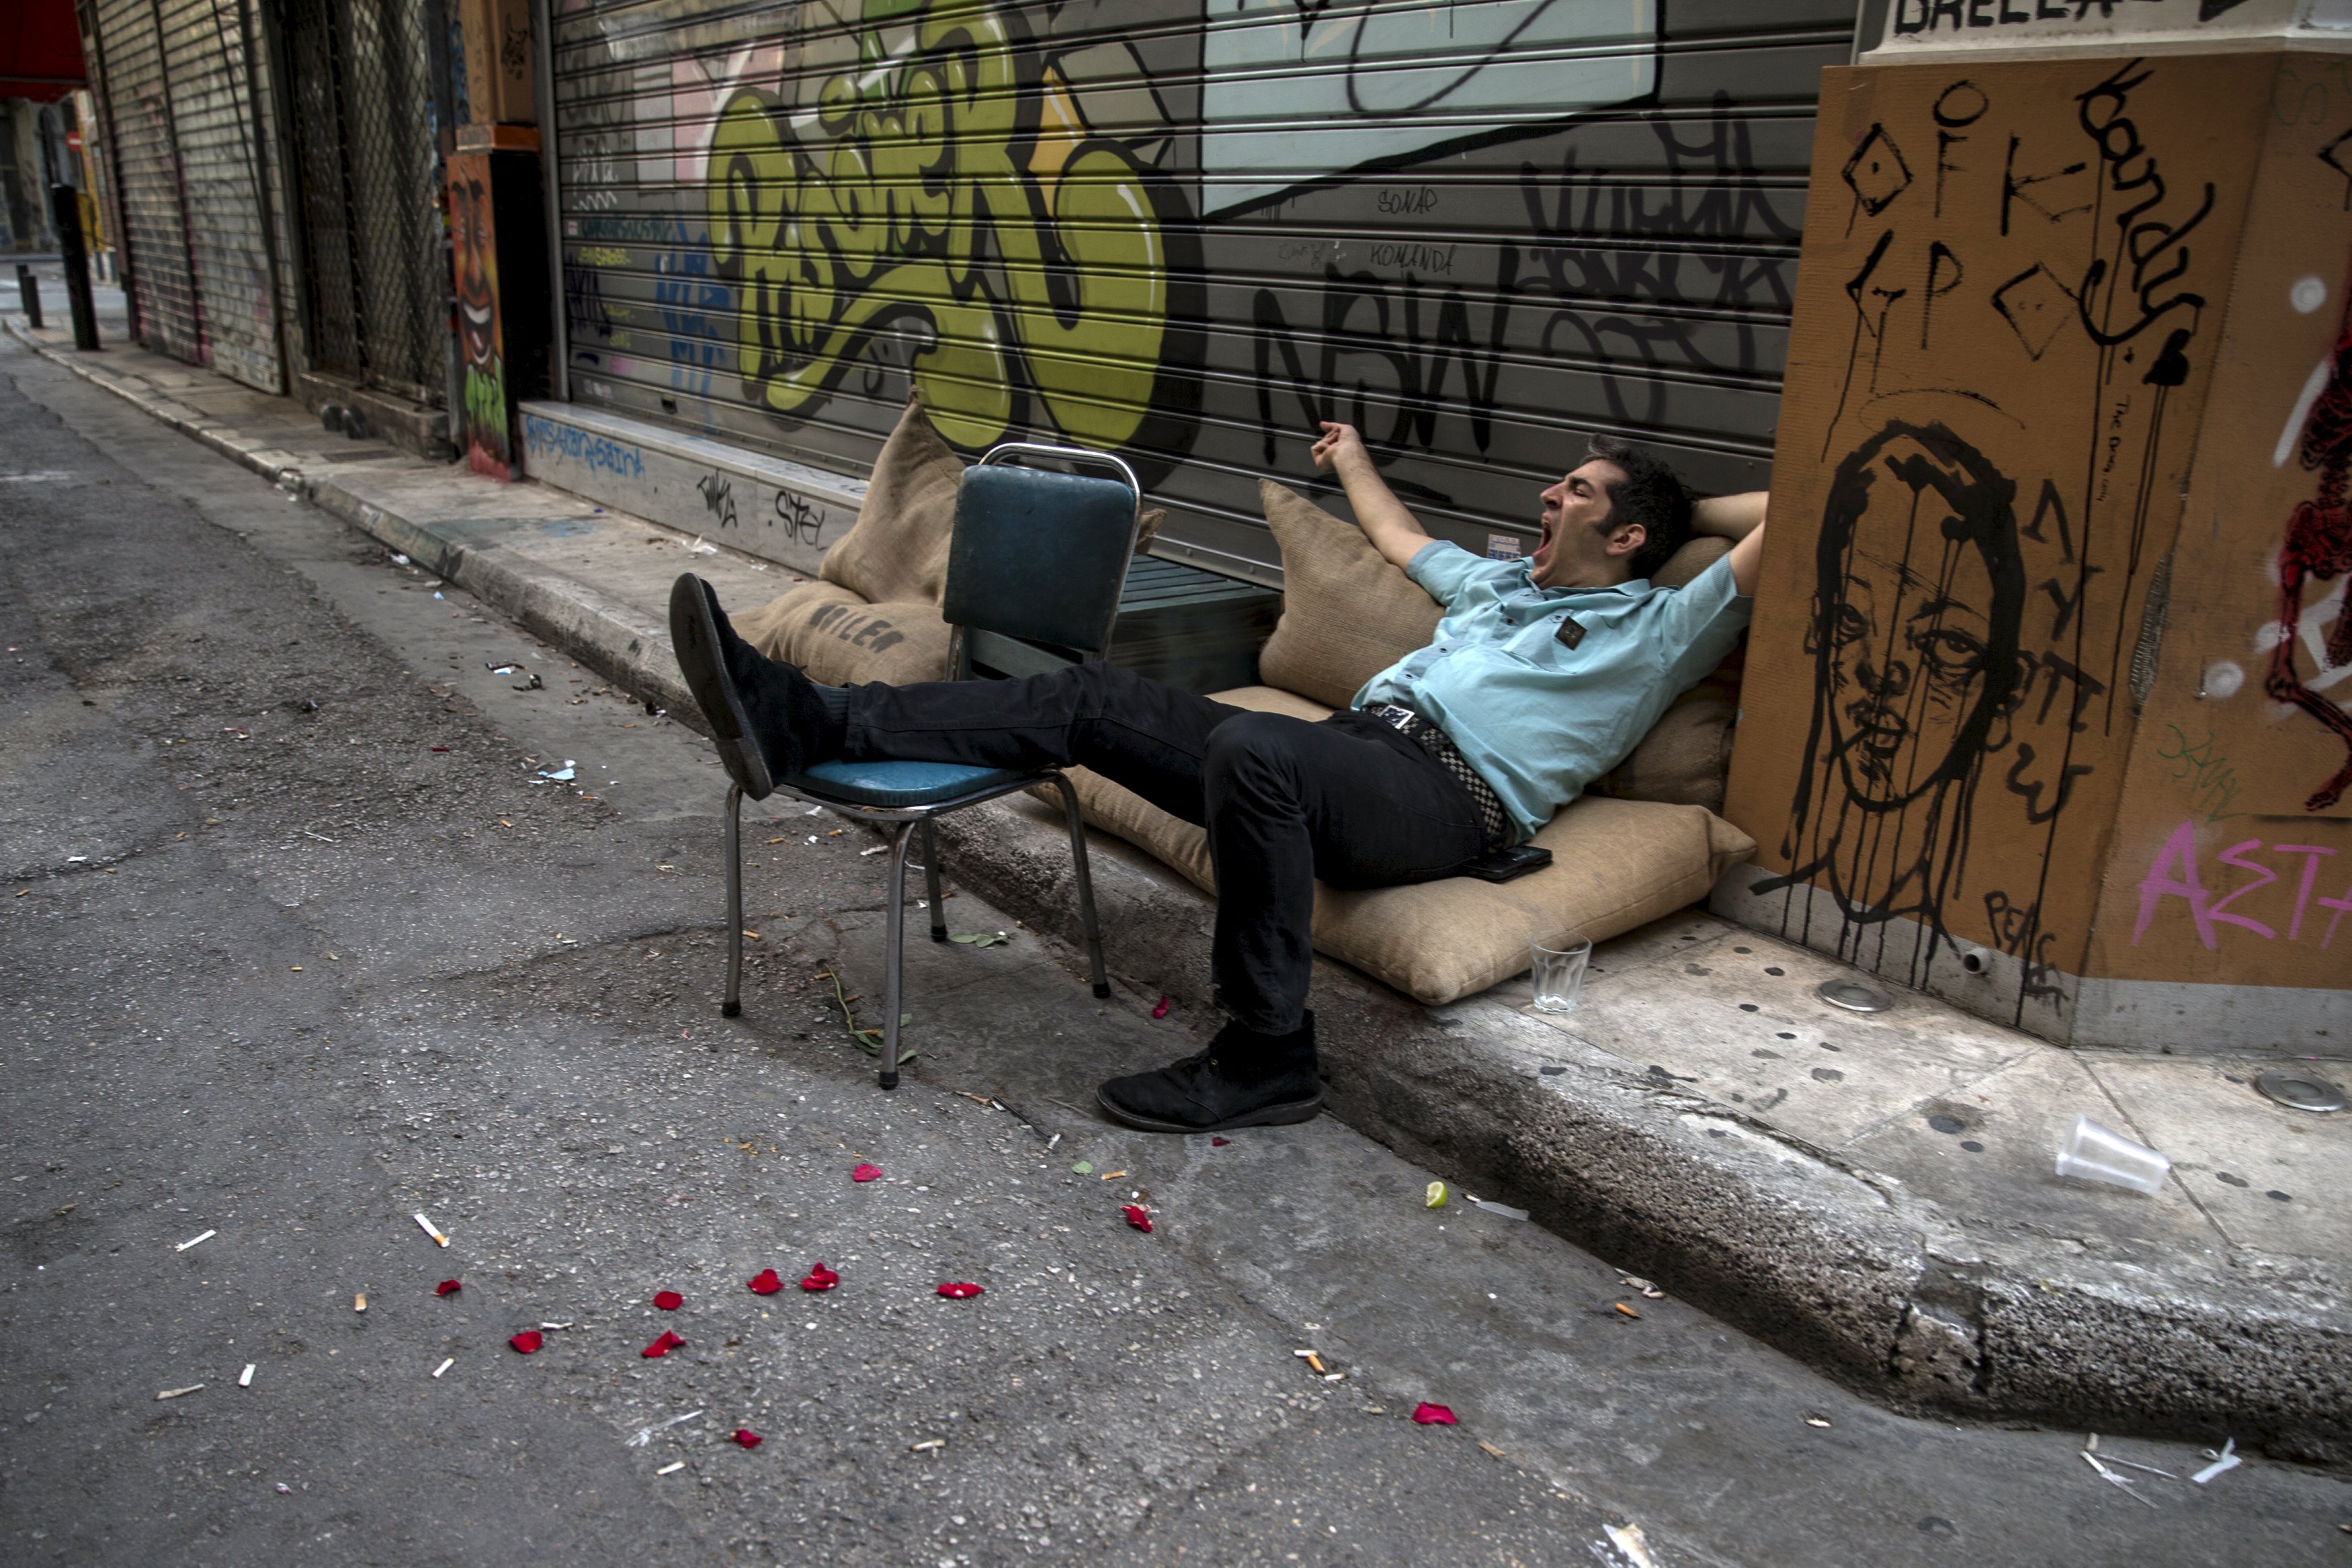 A man yawns while resting on a street in Athens, Greece June 28, 2015. Greece's European partners shut the door on extending a credit lifeline to Athens, leaving the country facing a default that could push it out of the euro and cause ripple effects across the European economy and beyond. REUTERS/Marko Djurica